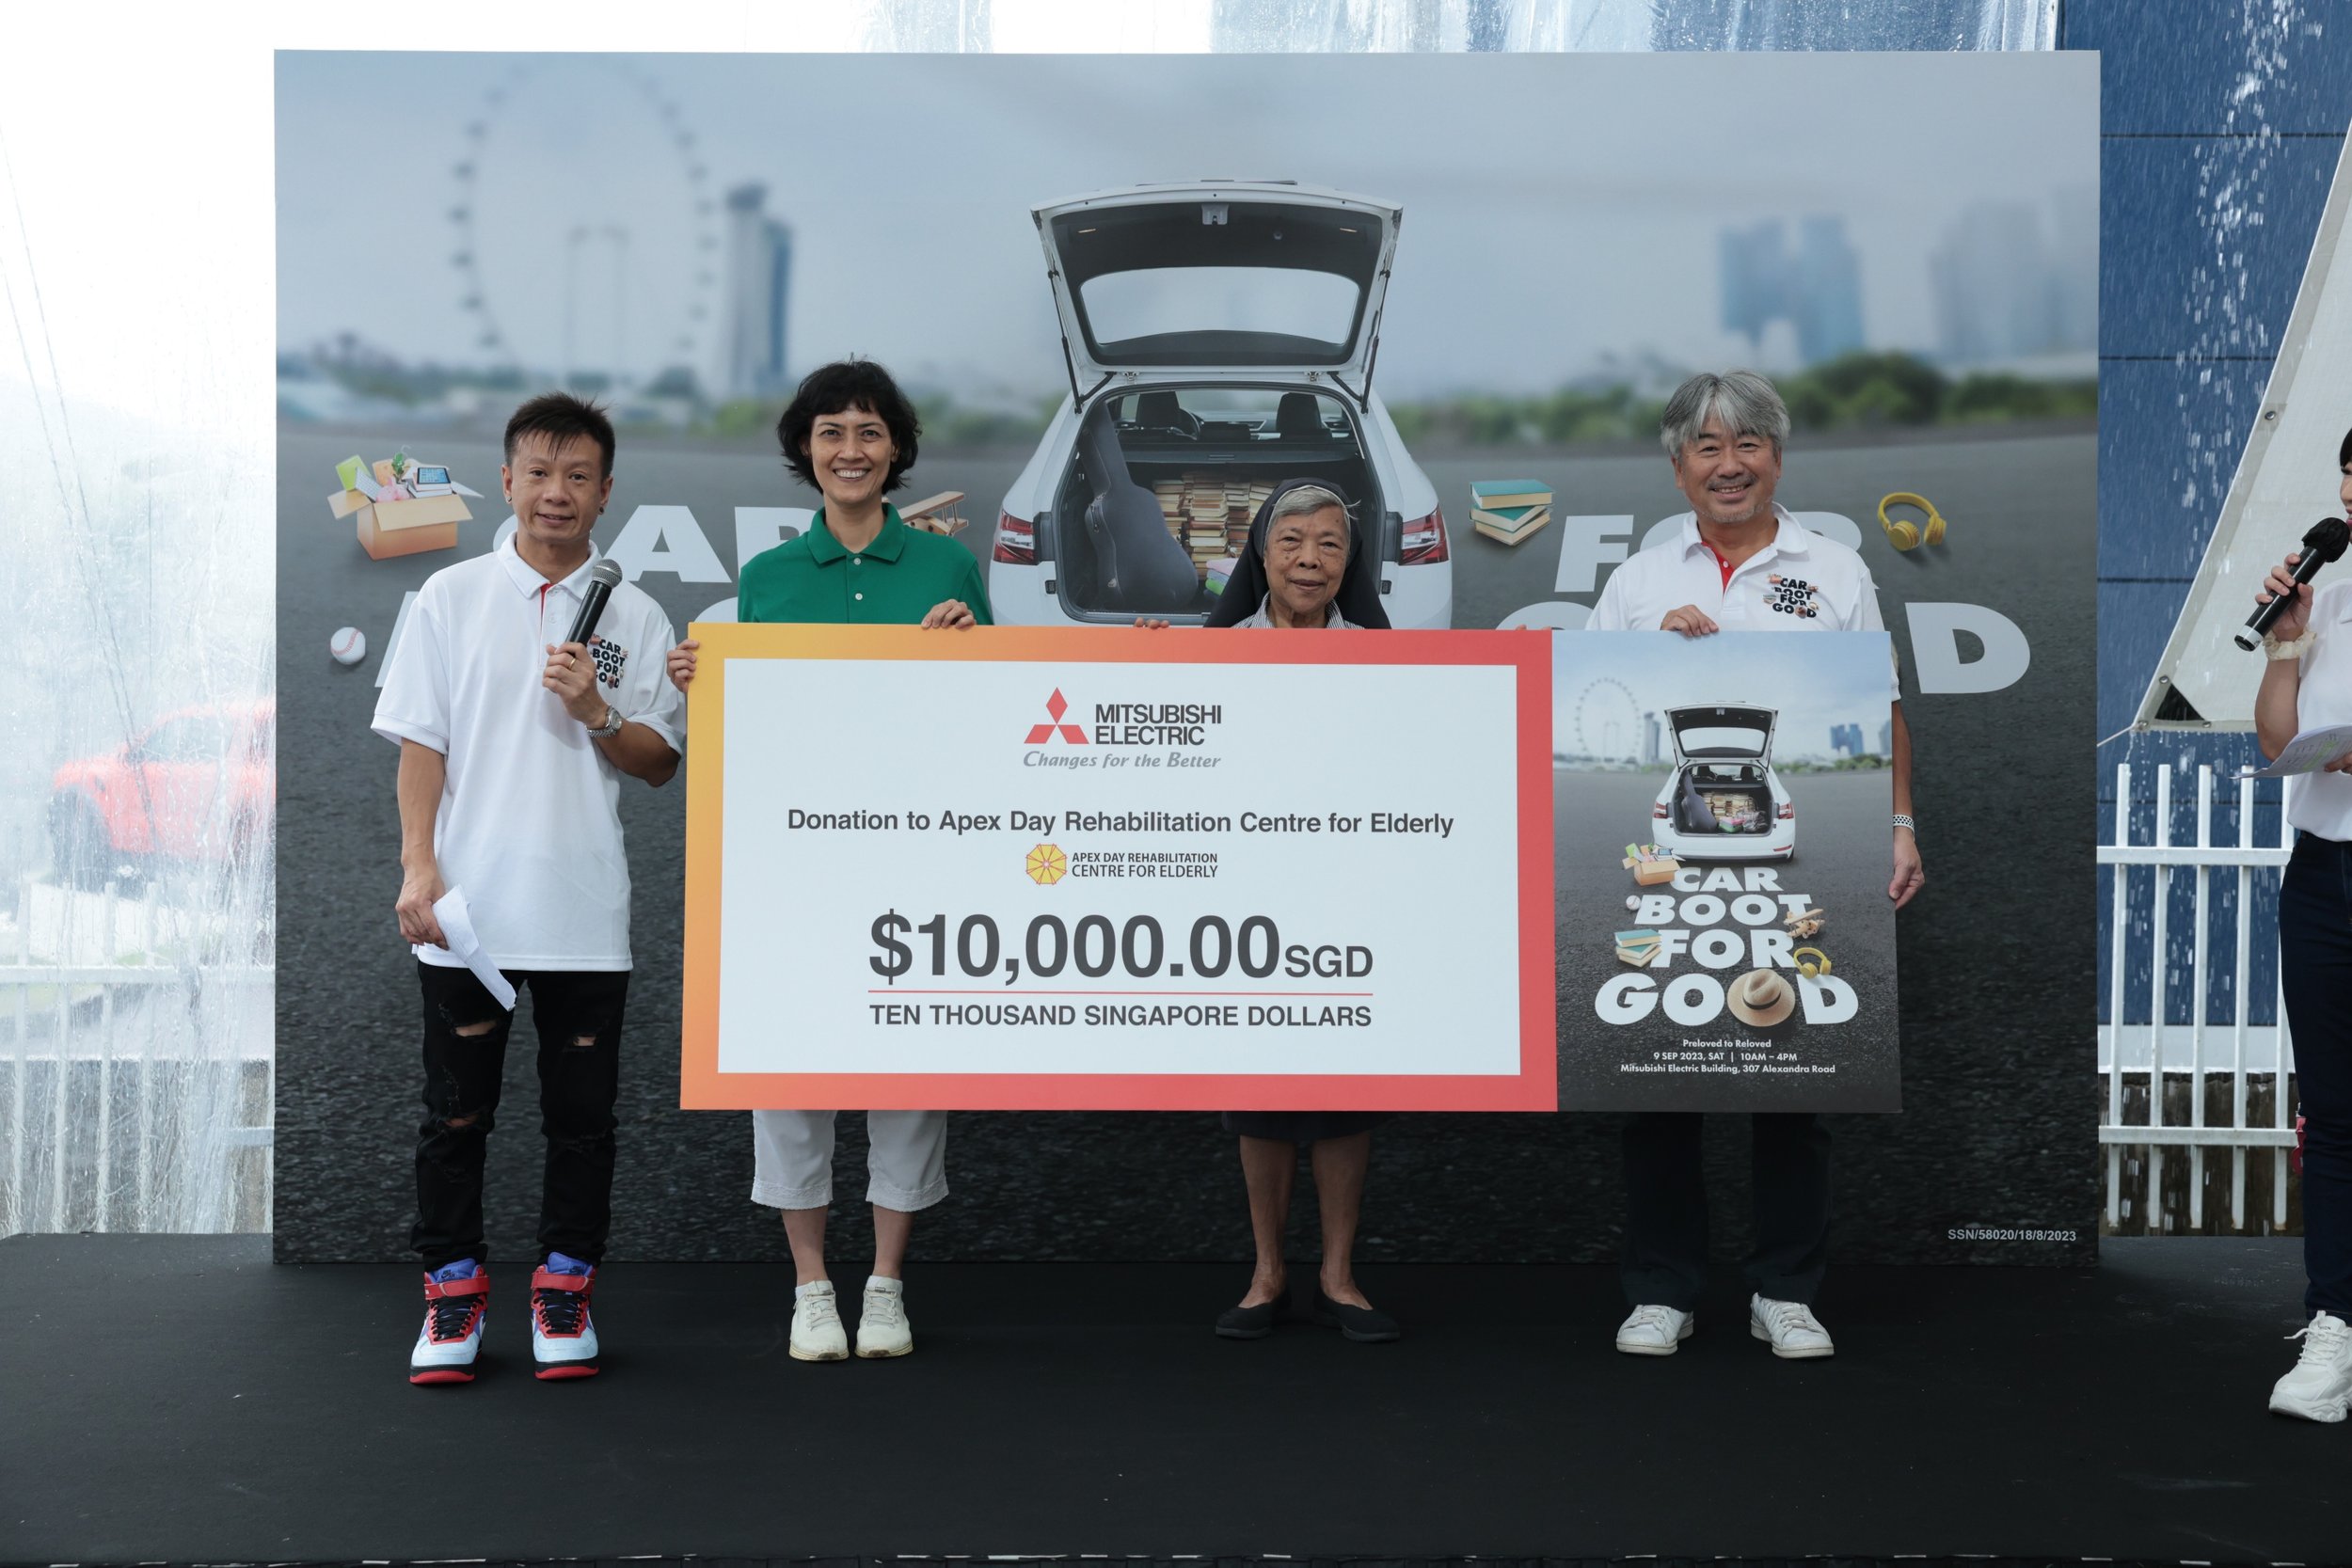 batch_Mitsubishi Electric Asia presents charity Apex Day Rehabilitation Centre for Elderly with $10,000 donation.JPG